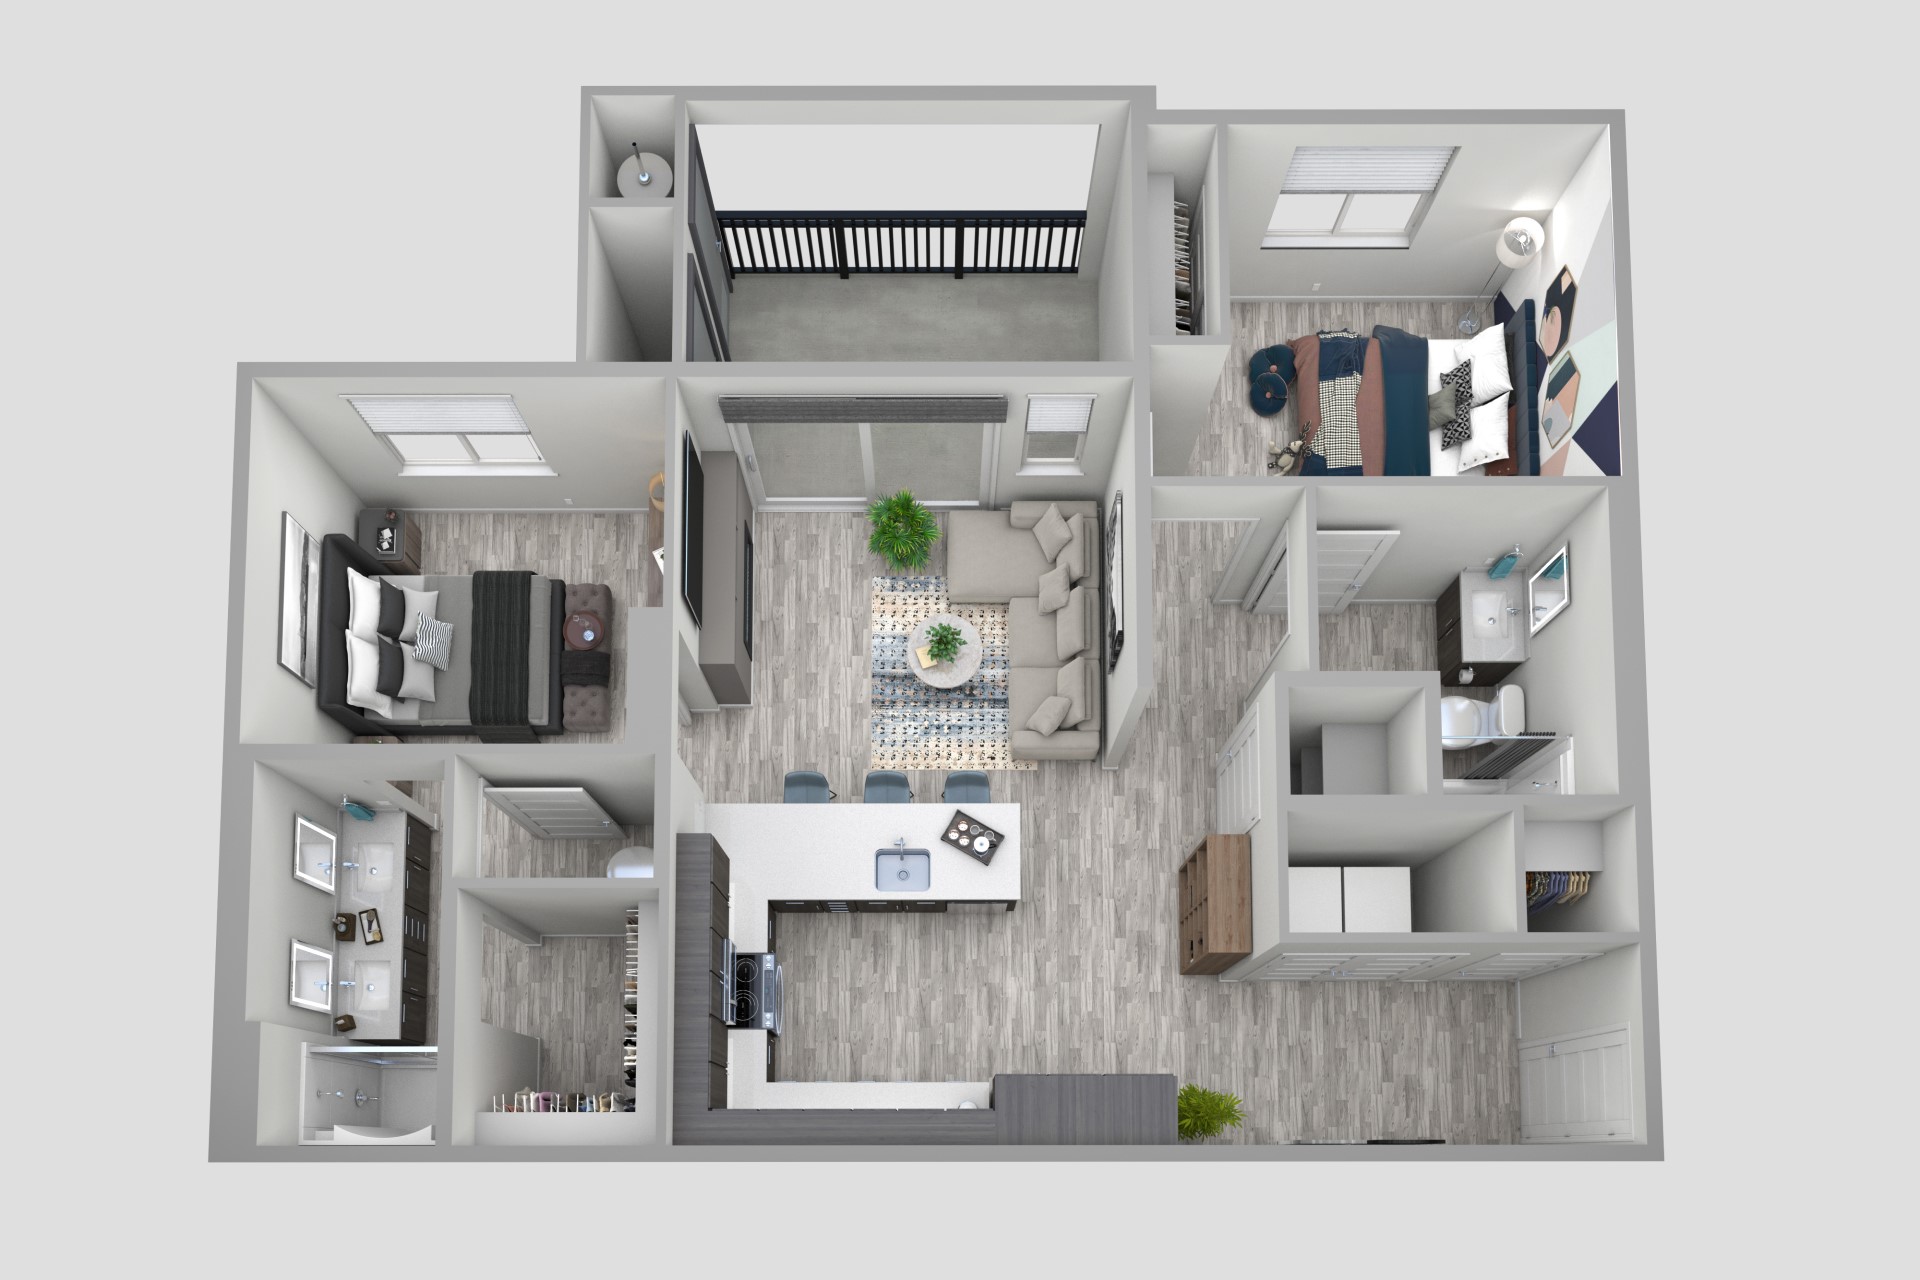 The Overlooks Apartments at Keystone Canyon - Reno NV - Floor Plan - The Nightscape